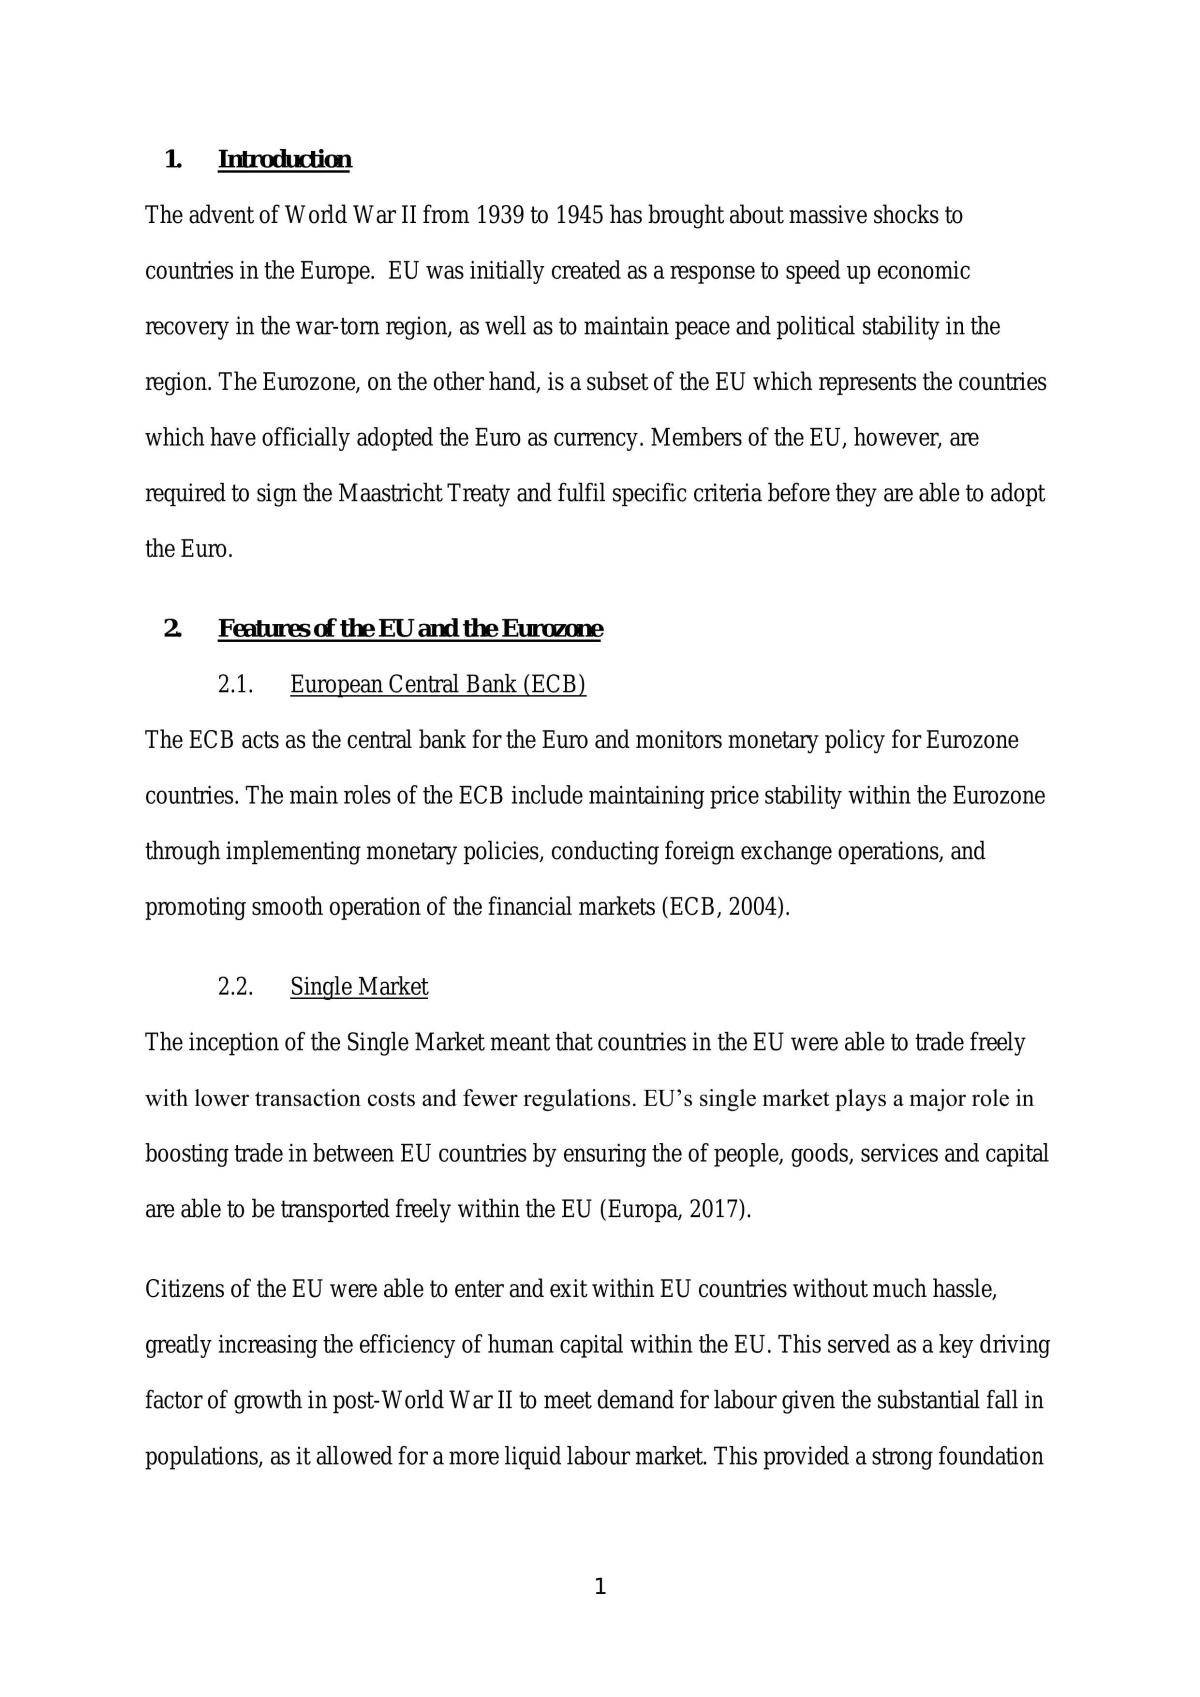 FIN3703 Project - EU and Eurozone - Page 3